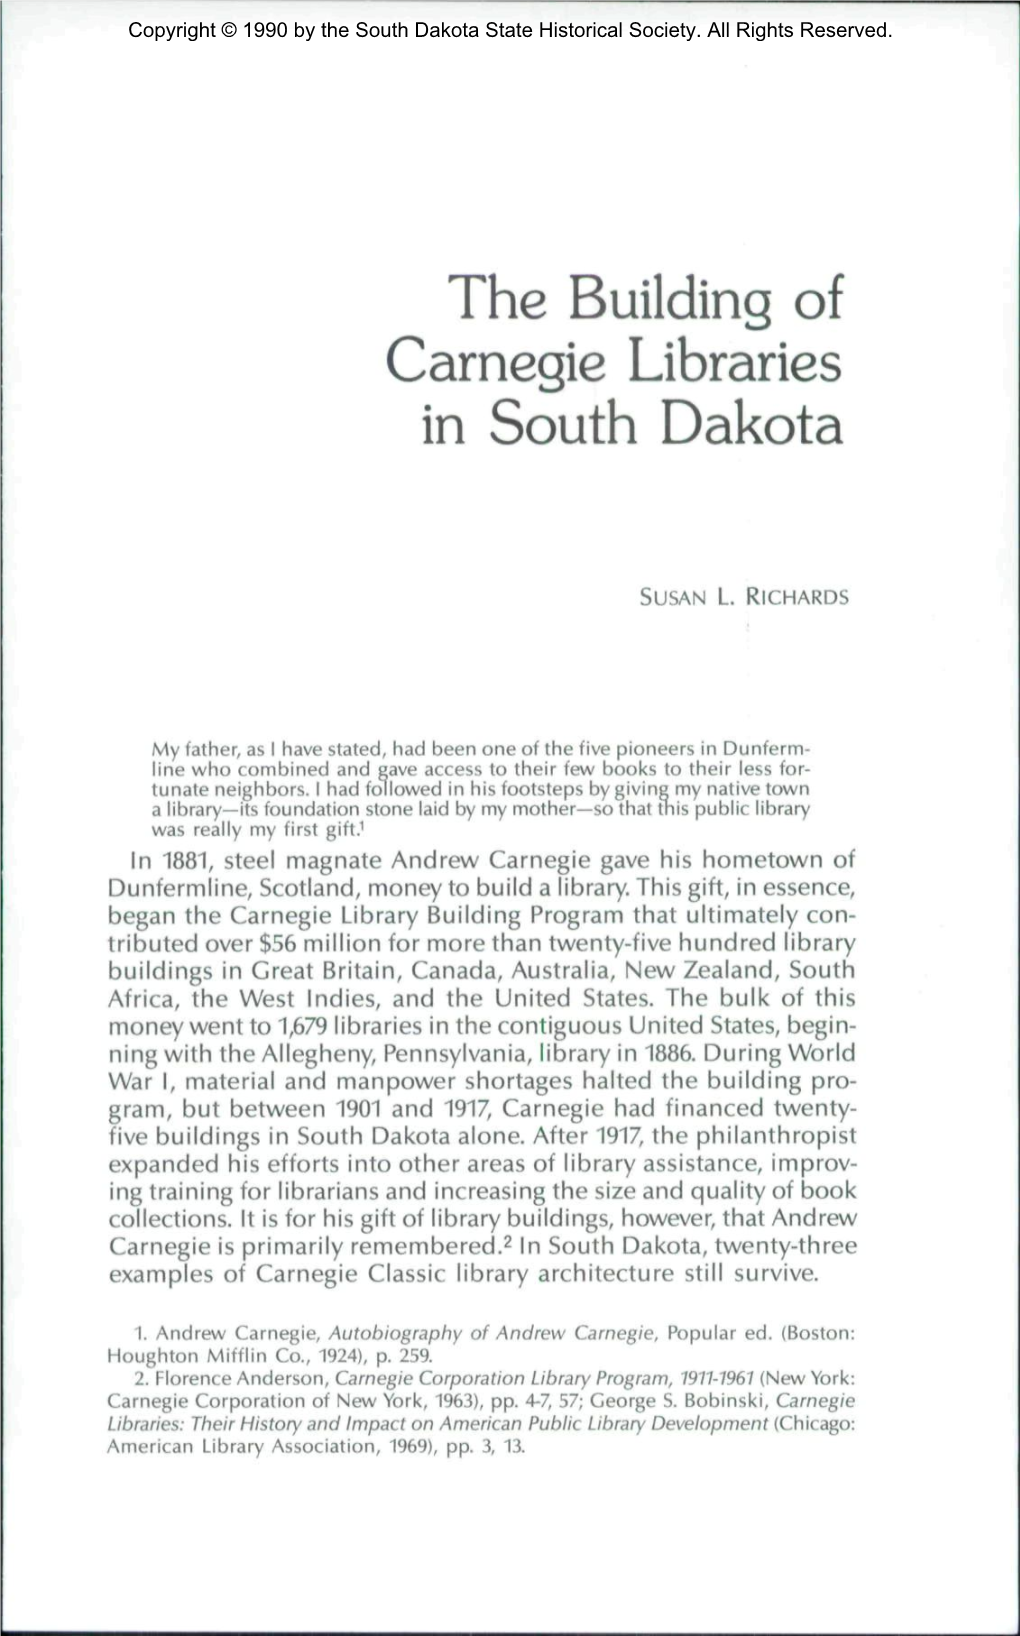 The Building of Carnegie Libraries in South Dakota